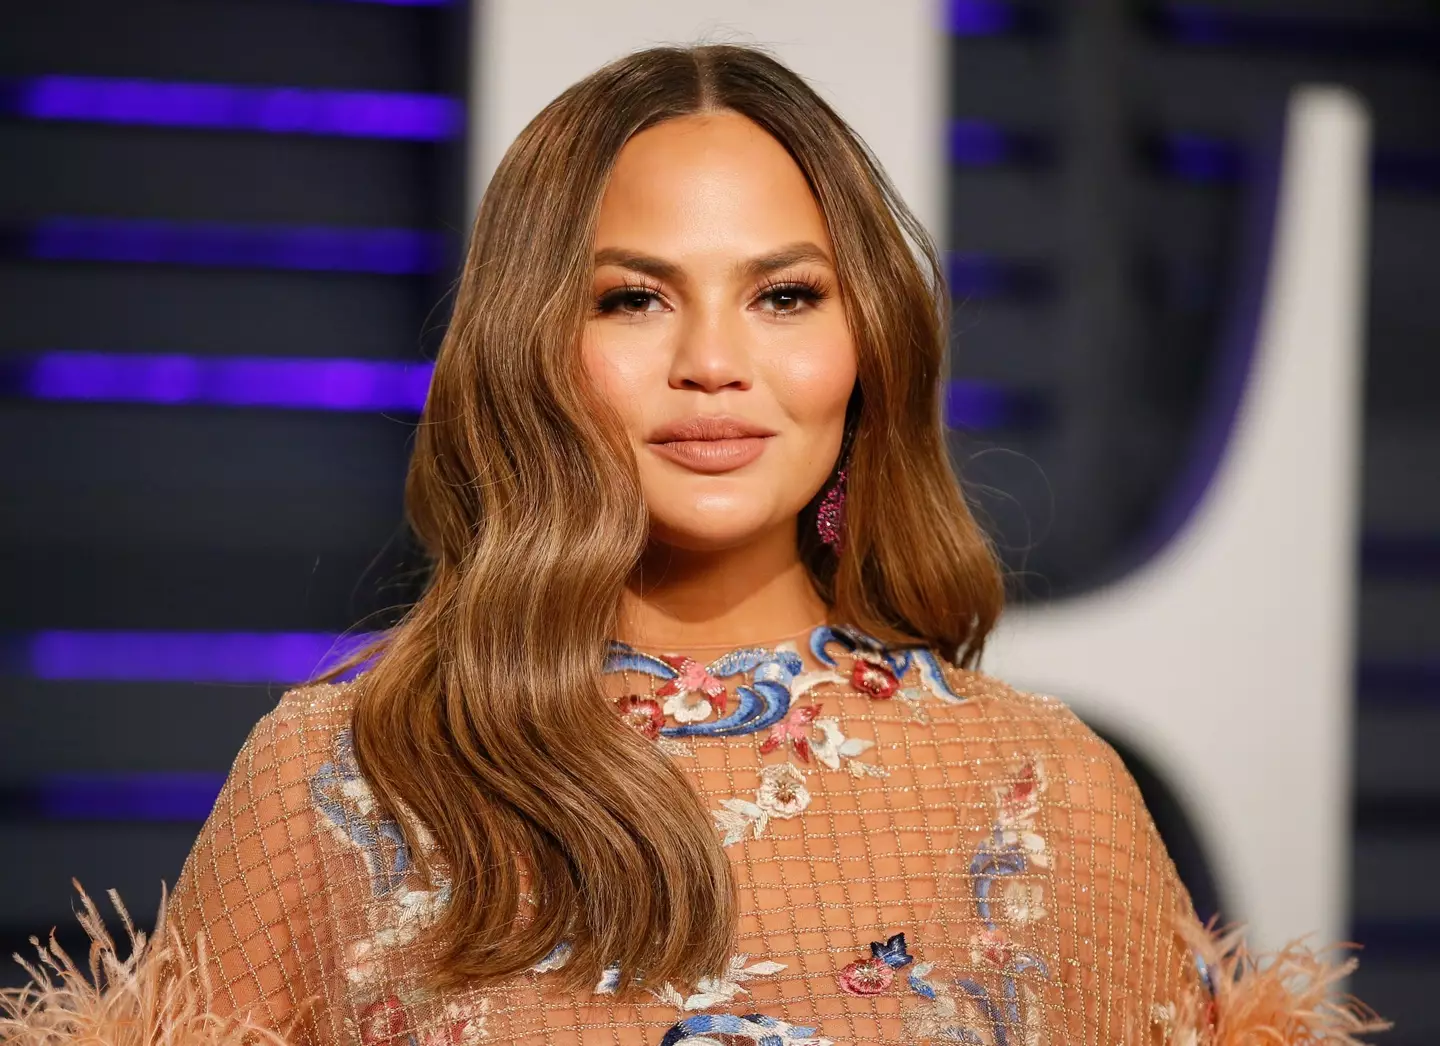 Chrissy Teigen has opened up about IVF bloating (